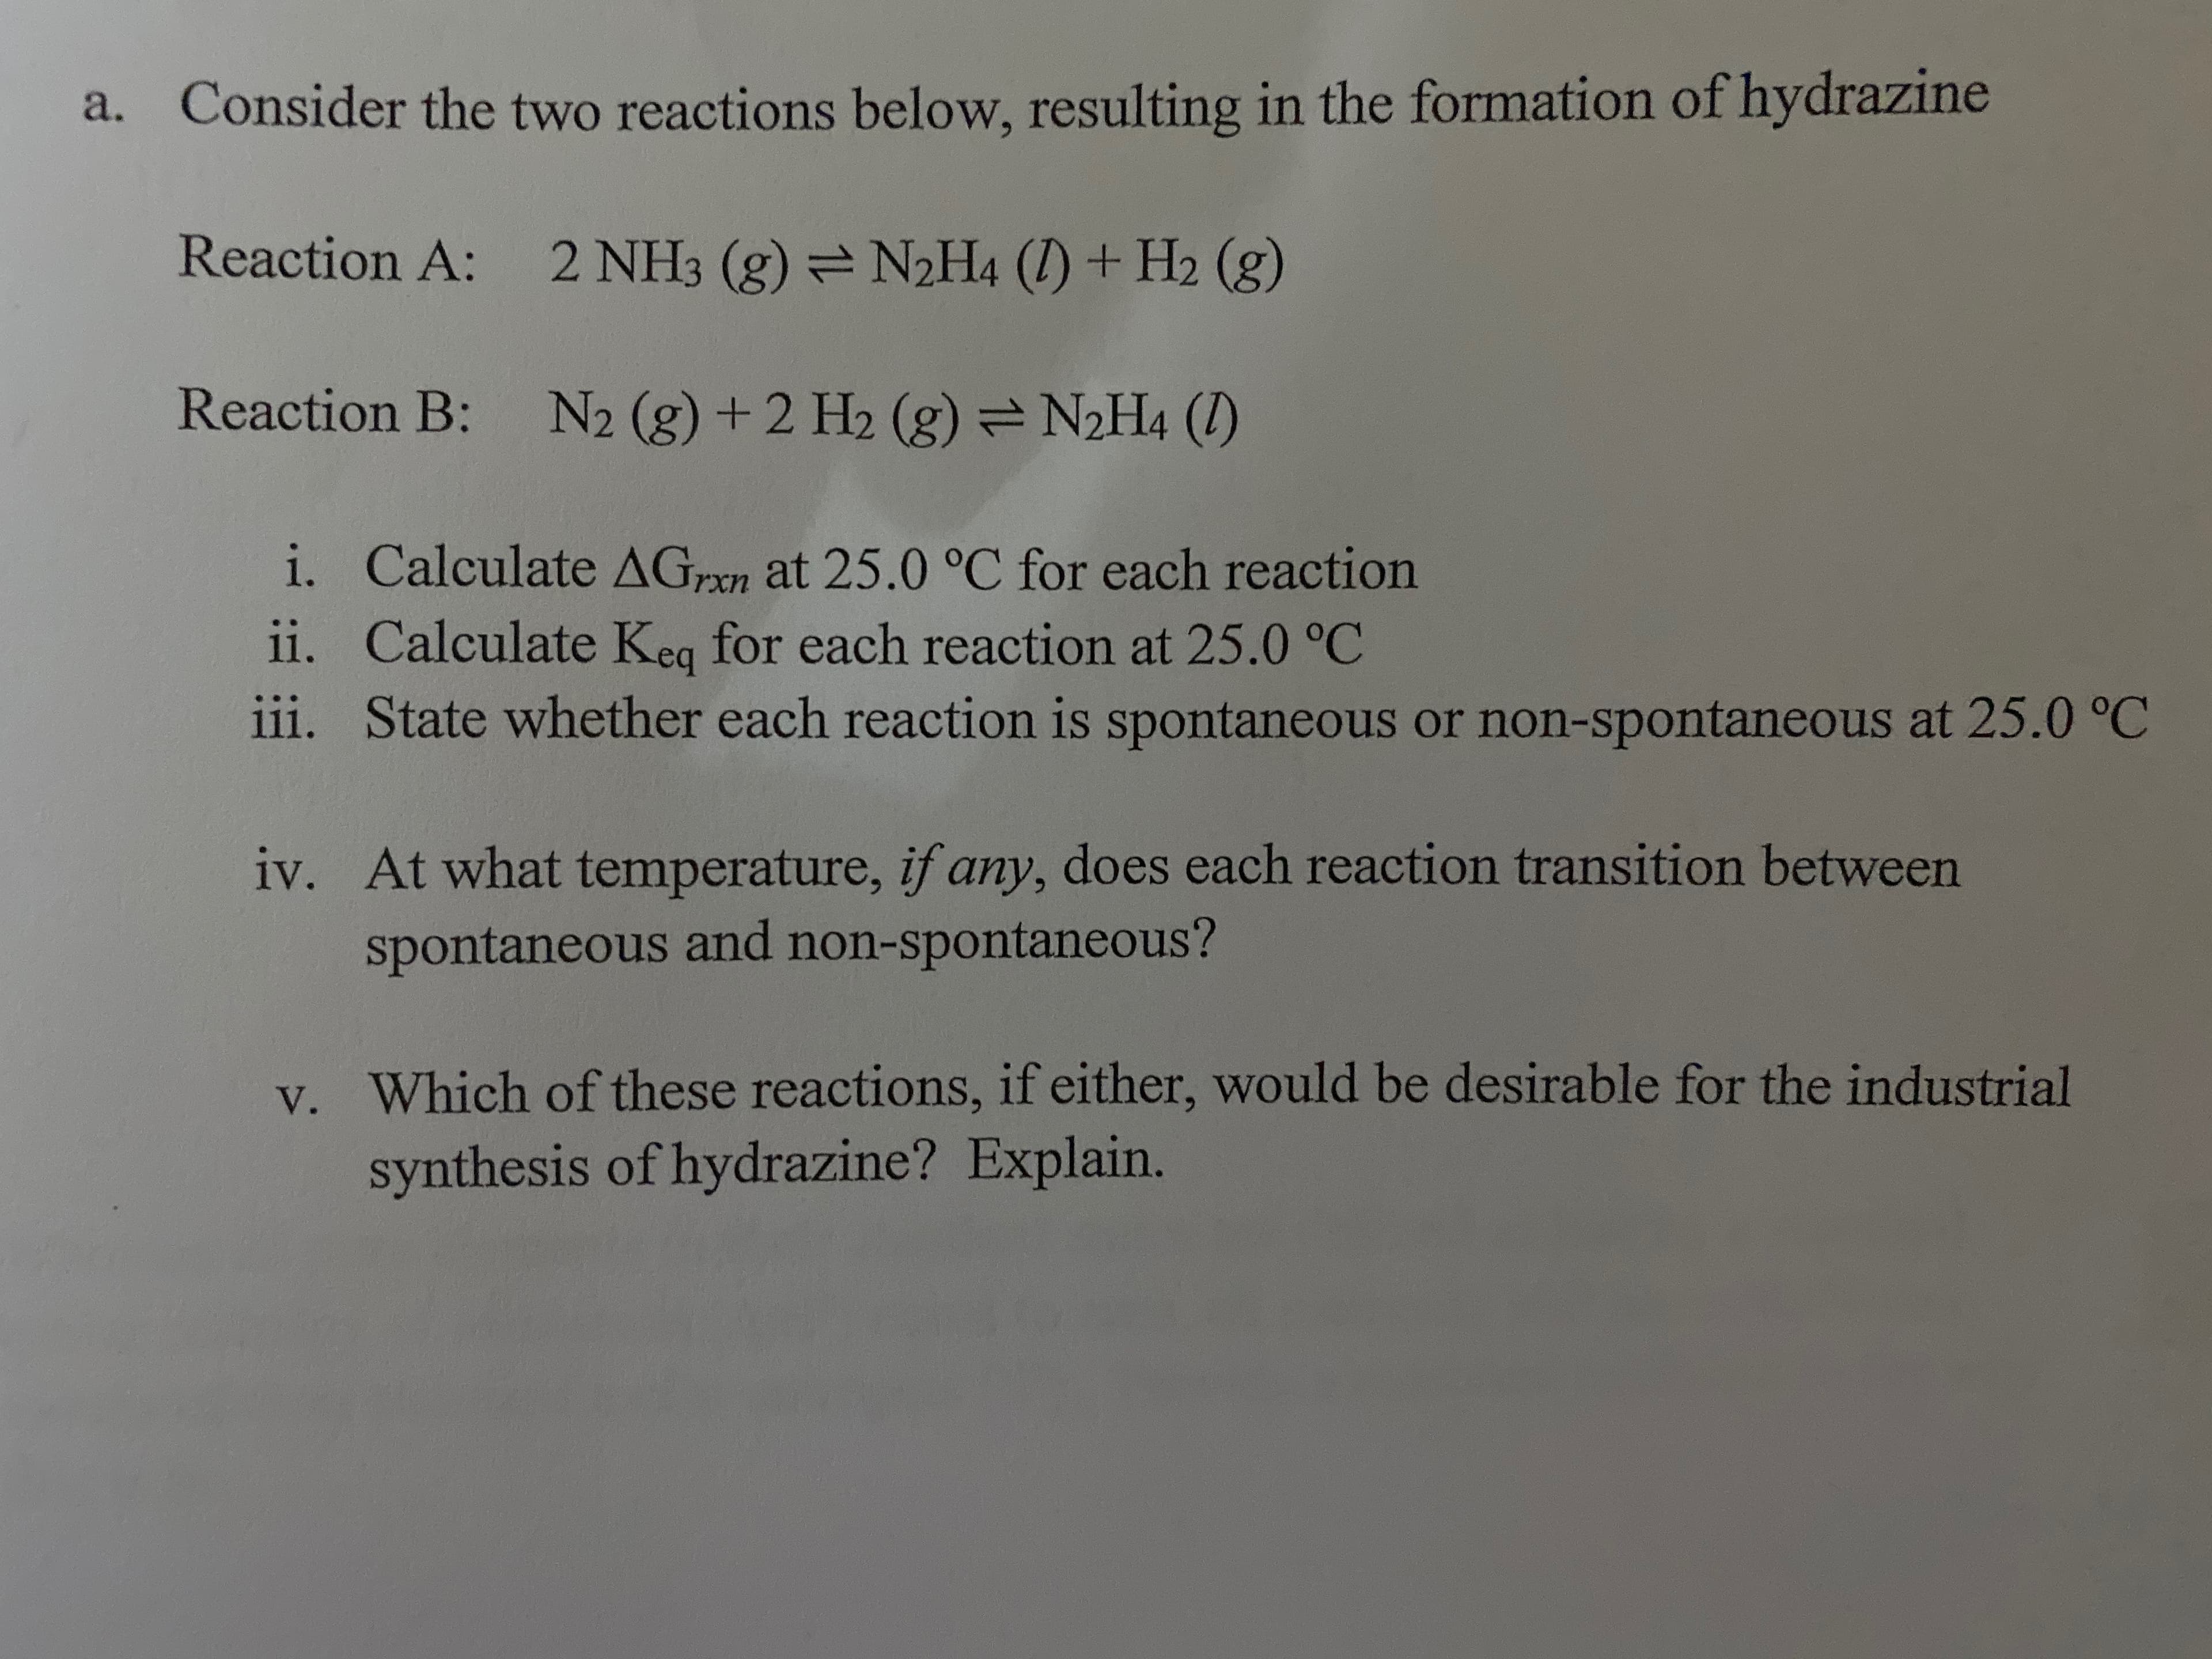 Consider the two reactions below, resulting in the formation of hydrazine
a.
Reaction A:
2 NH3 (g) =N2H4 (I) + H2 (g)
Reaction B:
N2 (g) +2 H2 (g) =N2H4 (1)
i. Calculate AGxn at 25.0 °C for each reaction
ii. Calculate Keg for each reaction at 25.0 °C
iii. State whether each reaction is spontaneous or non-spontaneous at 25.0 °C
iv. At what temperature, if any, does each reaction transition between
spontaneous and non-spontaneous?
v. Which of these reactions, if either, would be desirable for the industrial
synthesis of hydrazine? Explain.
